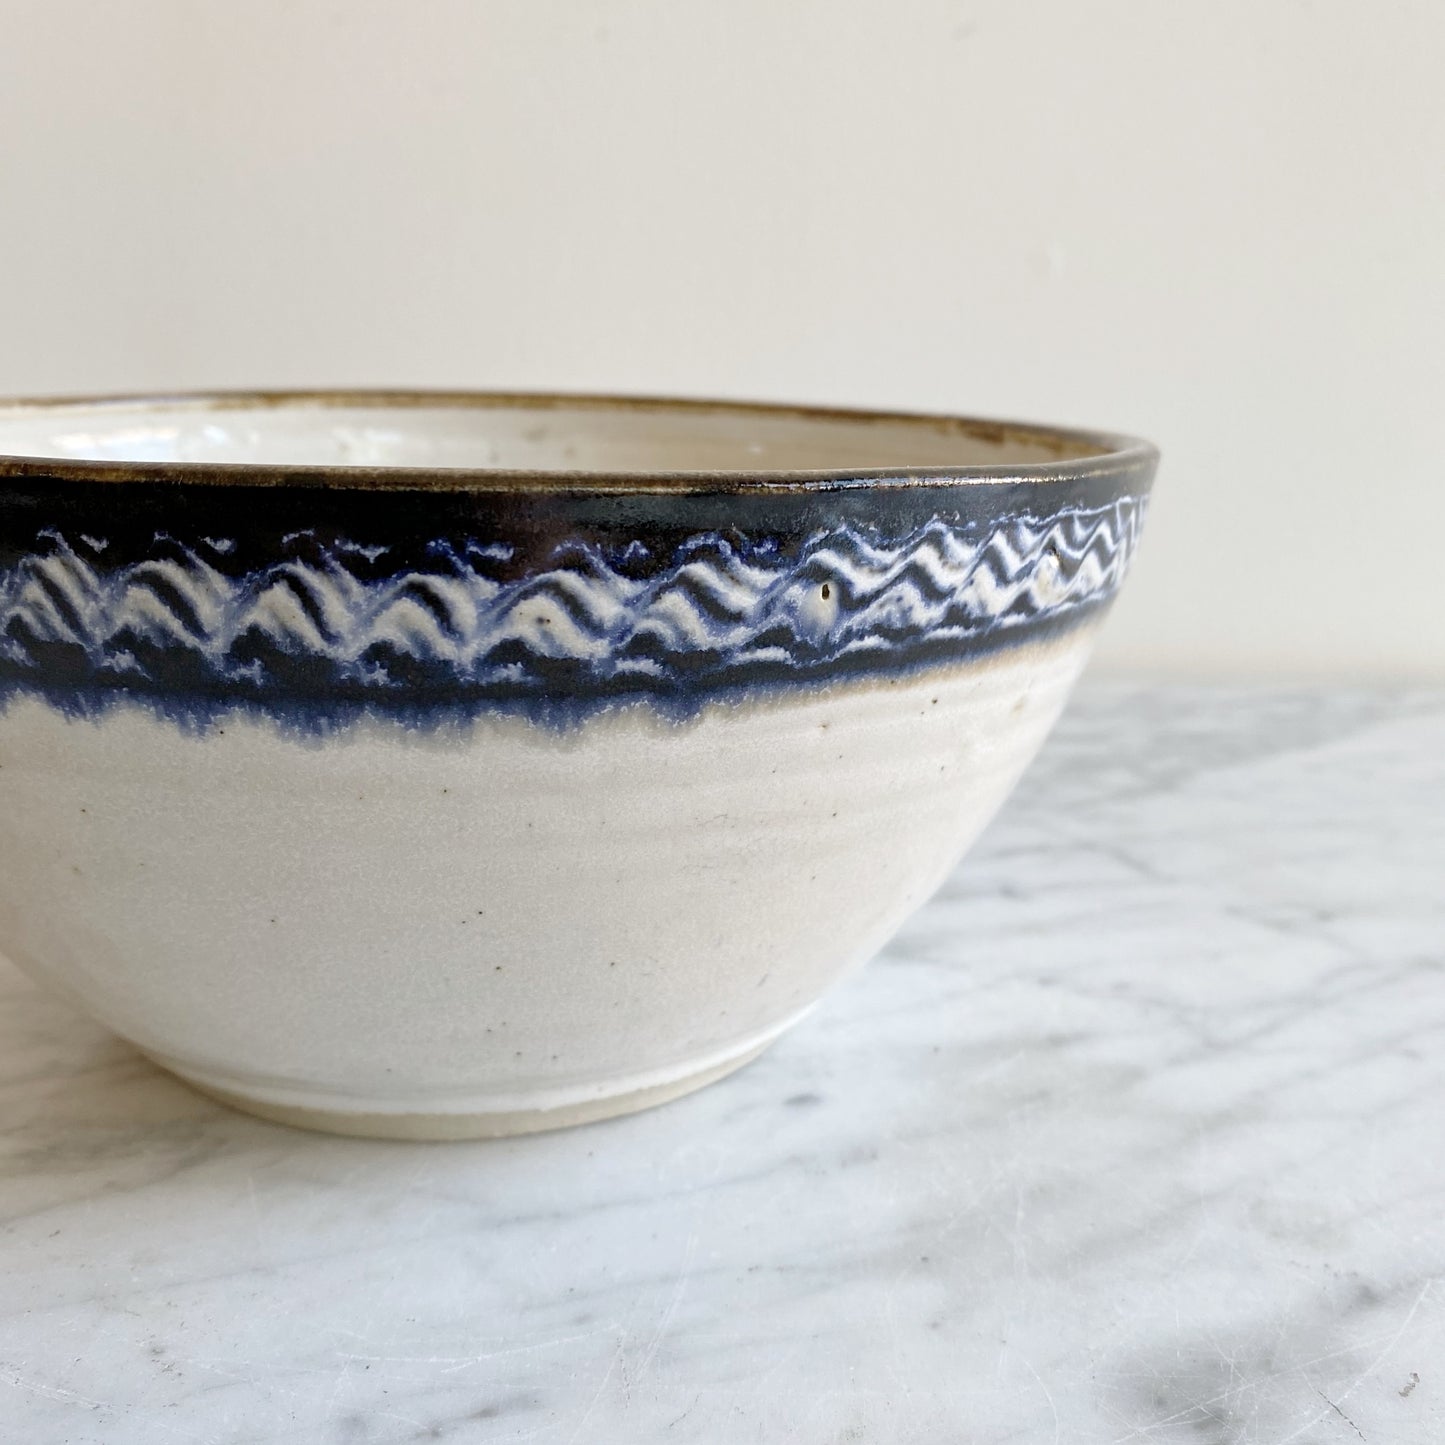 Vintage Pottery Bowl with "Wavy" Rim